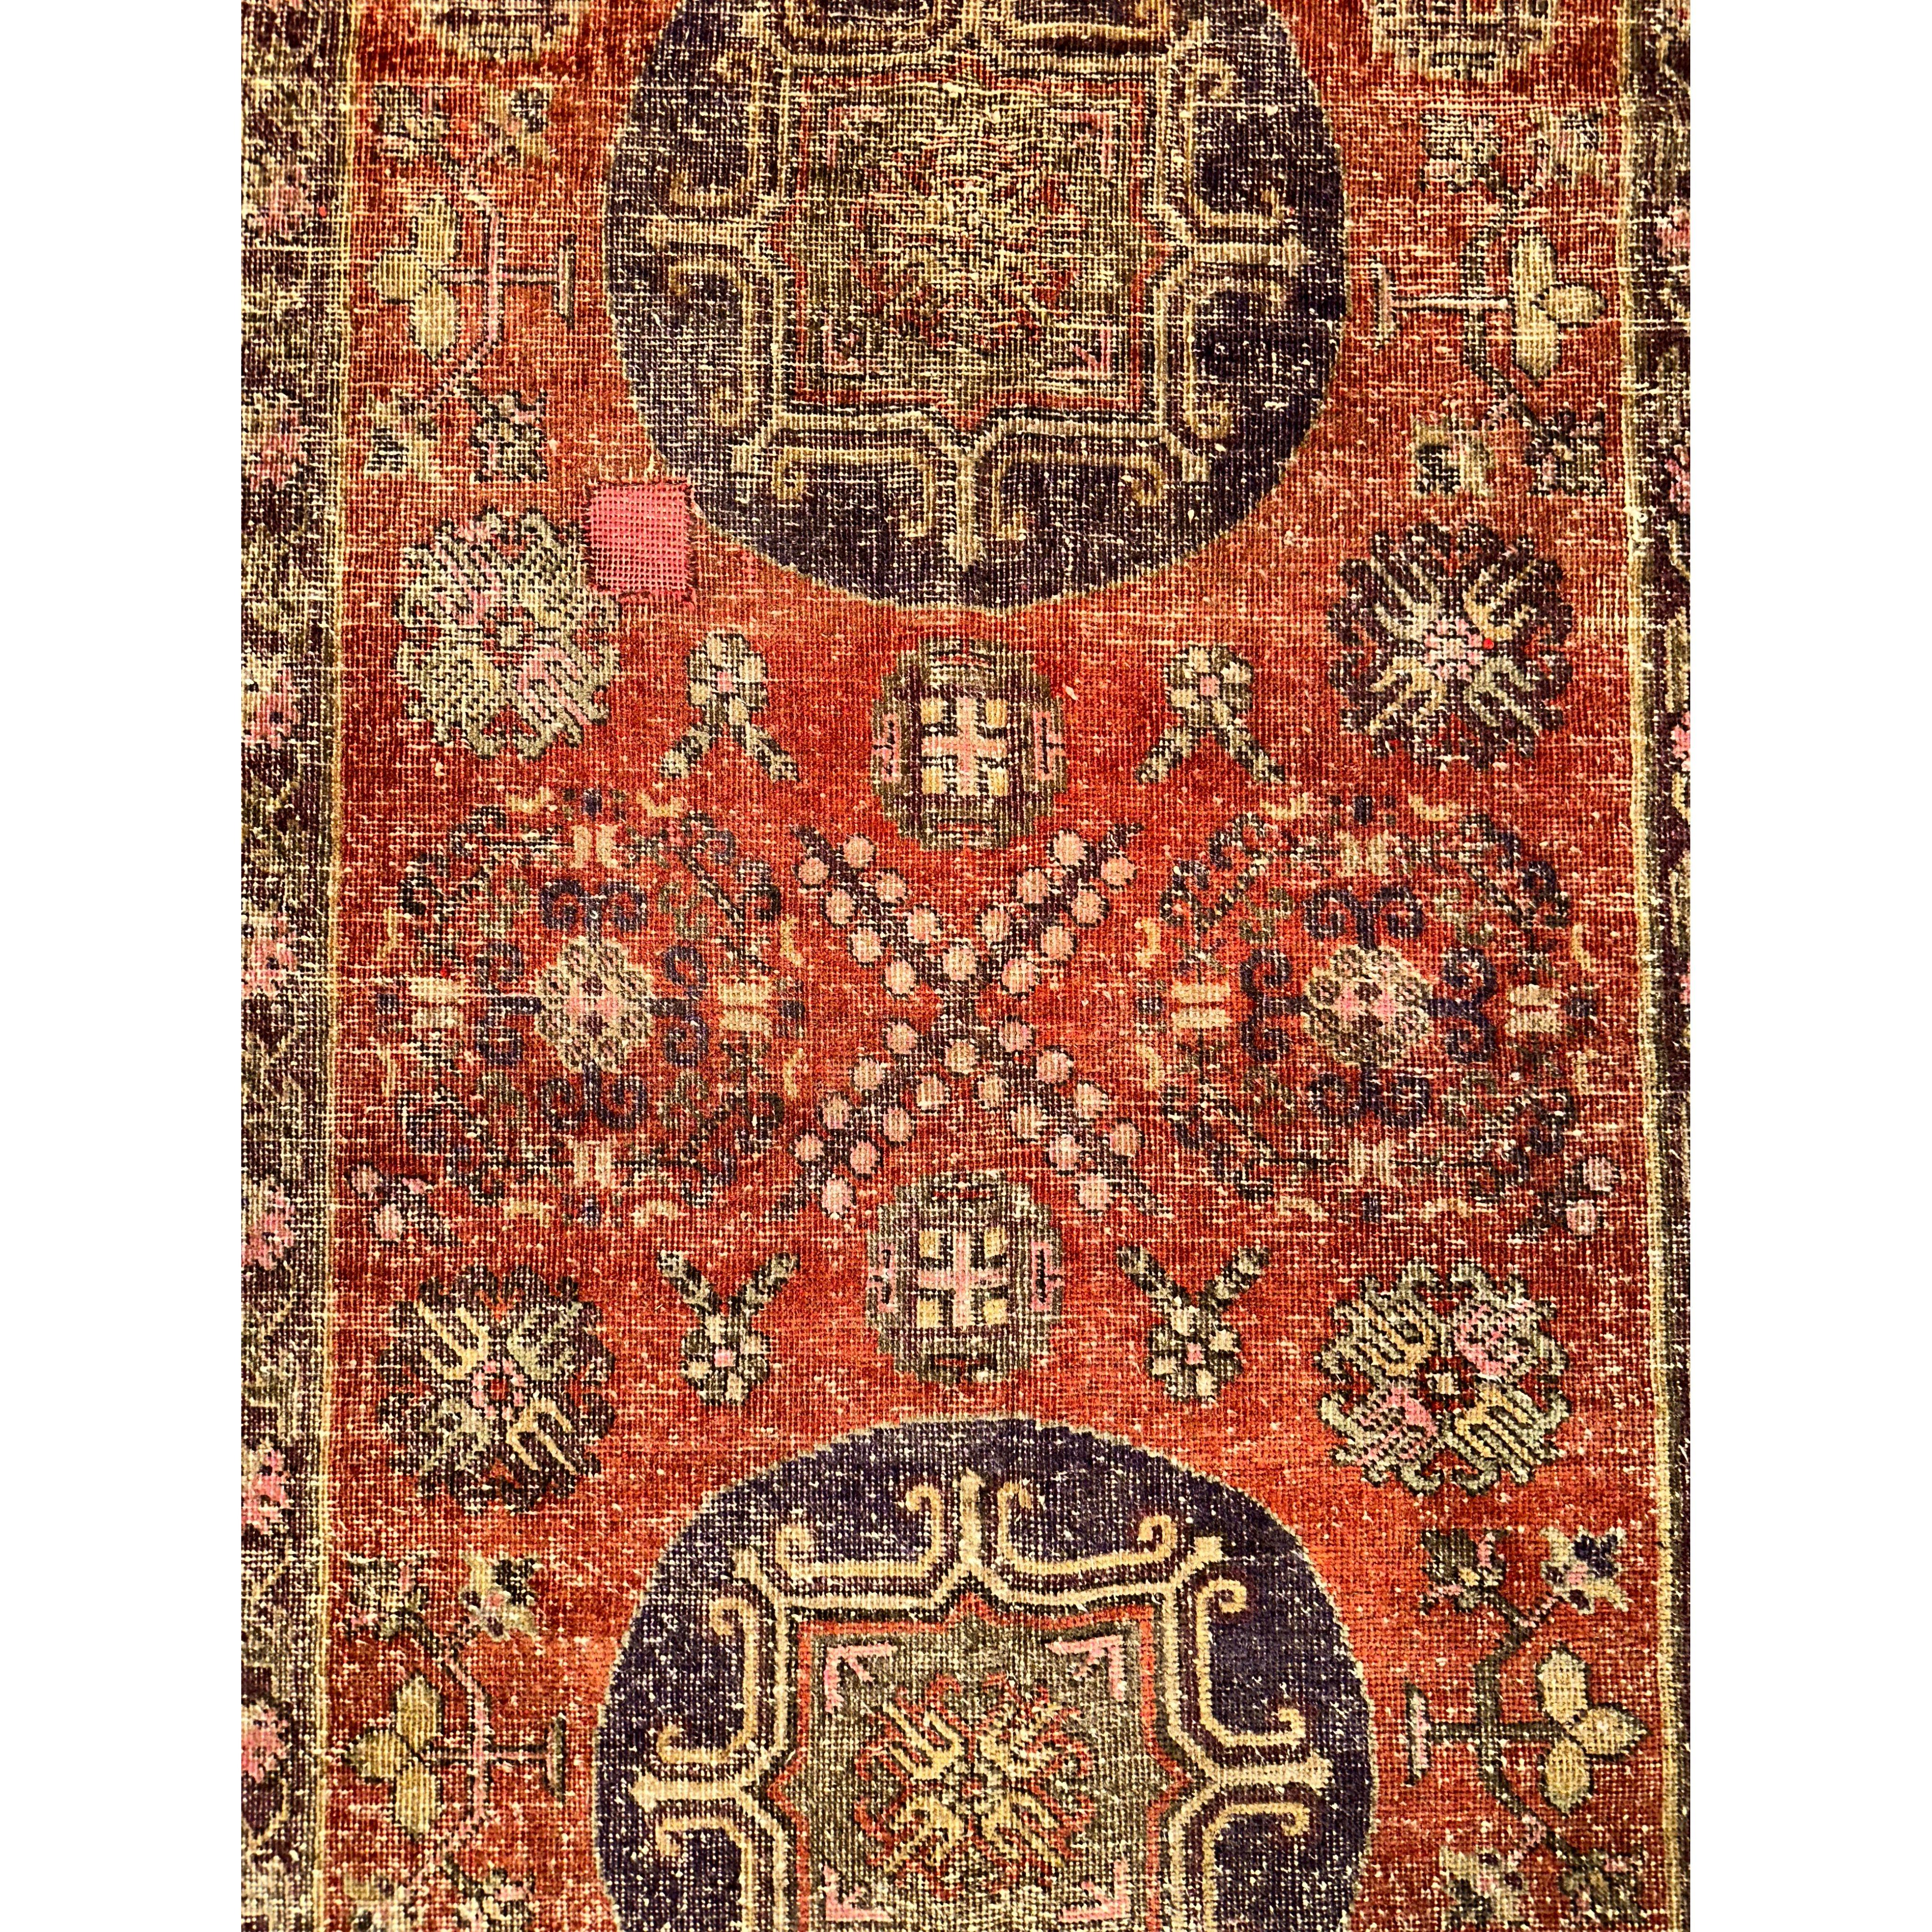 Late-19th Century Authentic Khotan Samarkand Rug In Good Condition For Sale In Los Angeles, US